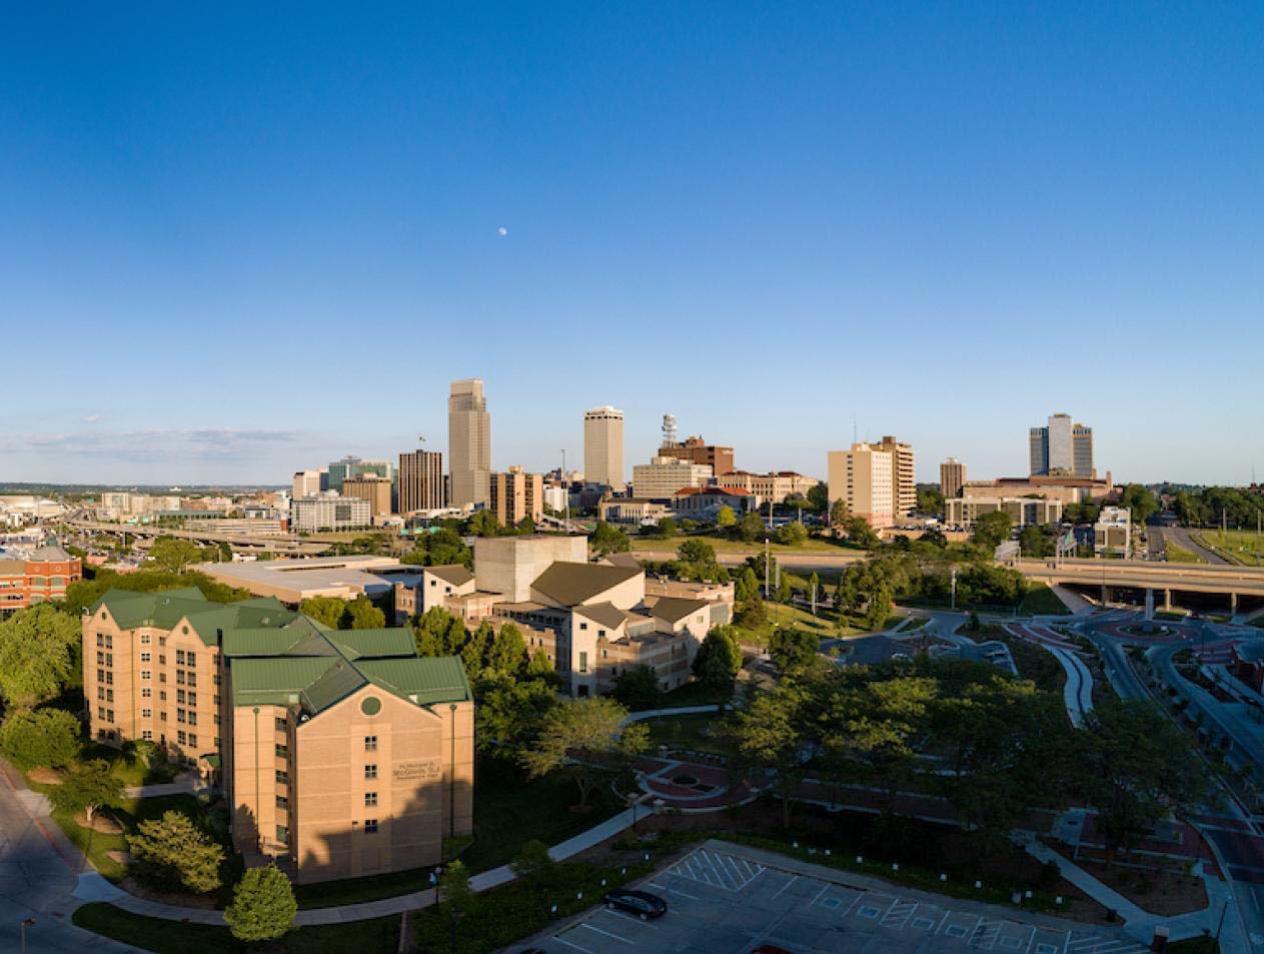 Creighton campus with Omaha downtown